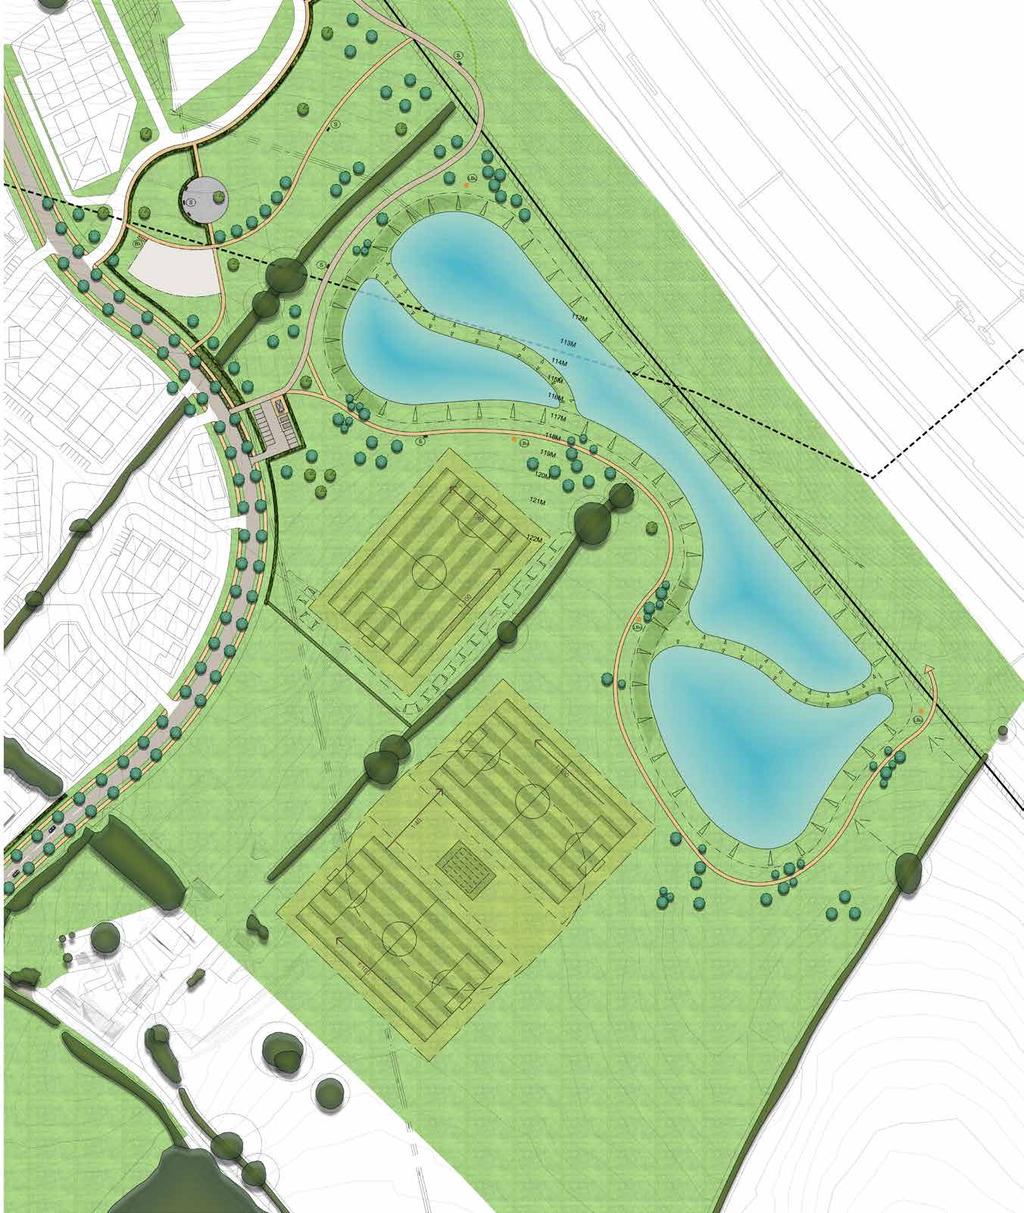 Landscaping and open spaces Our proposals are landscape-focused and seek to retain existing hedgerows, trees and field boundaries where possible.